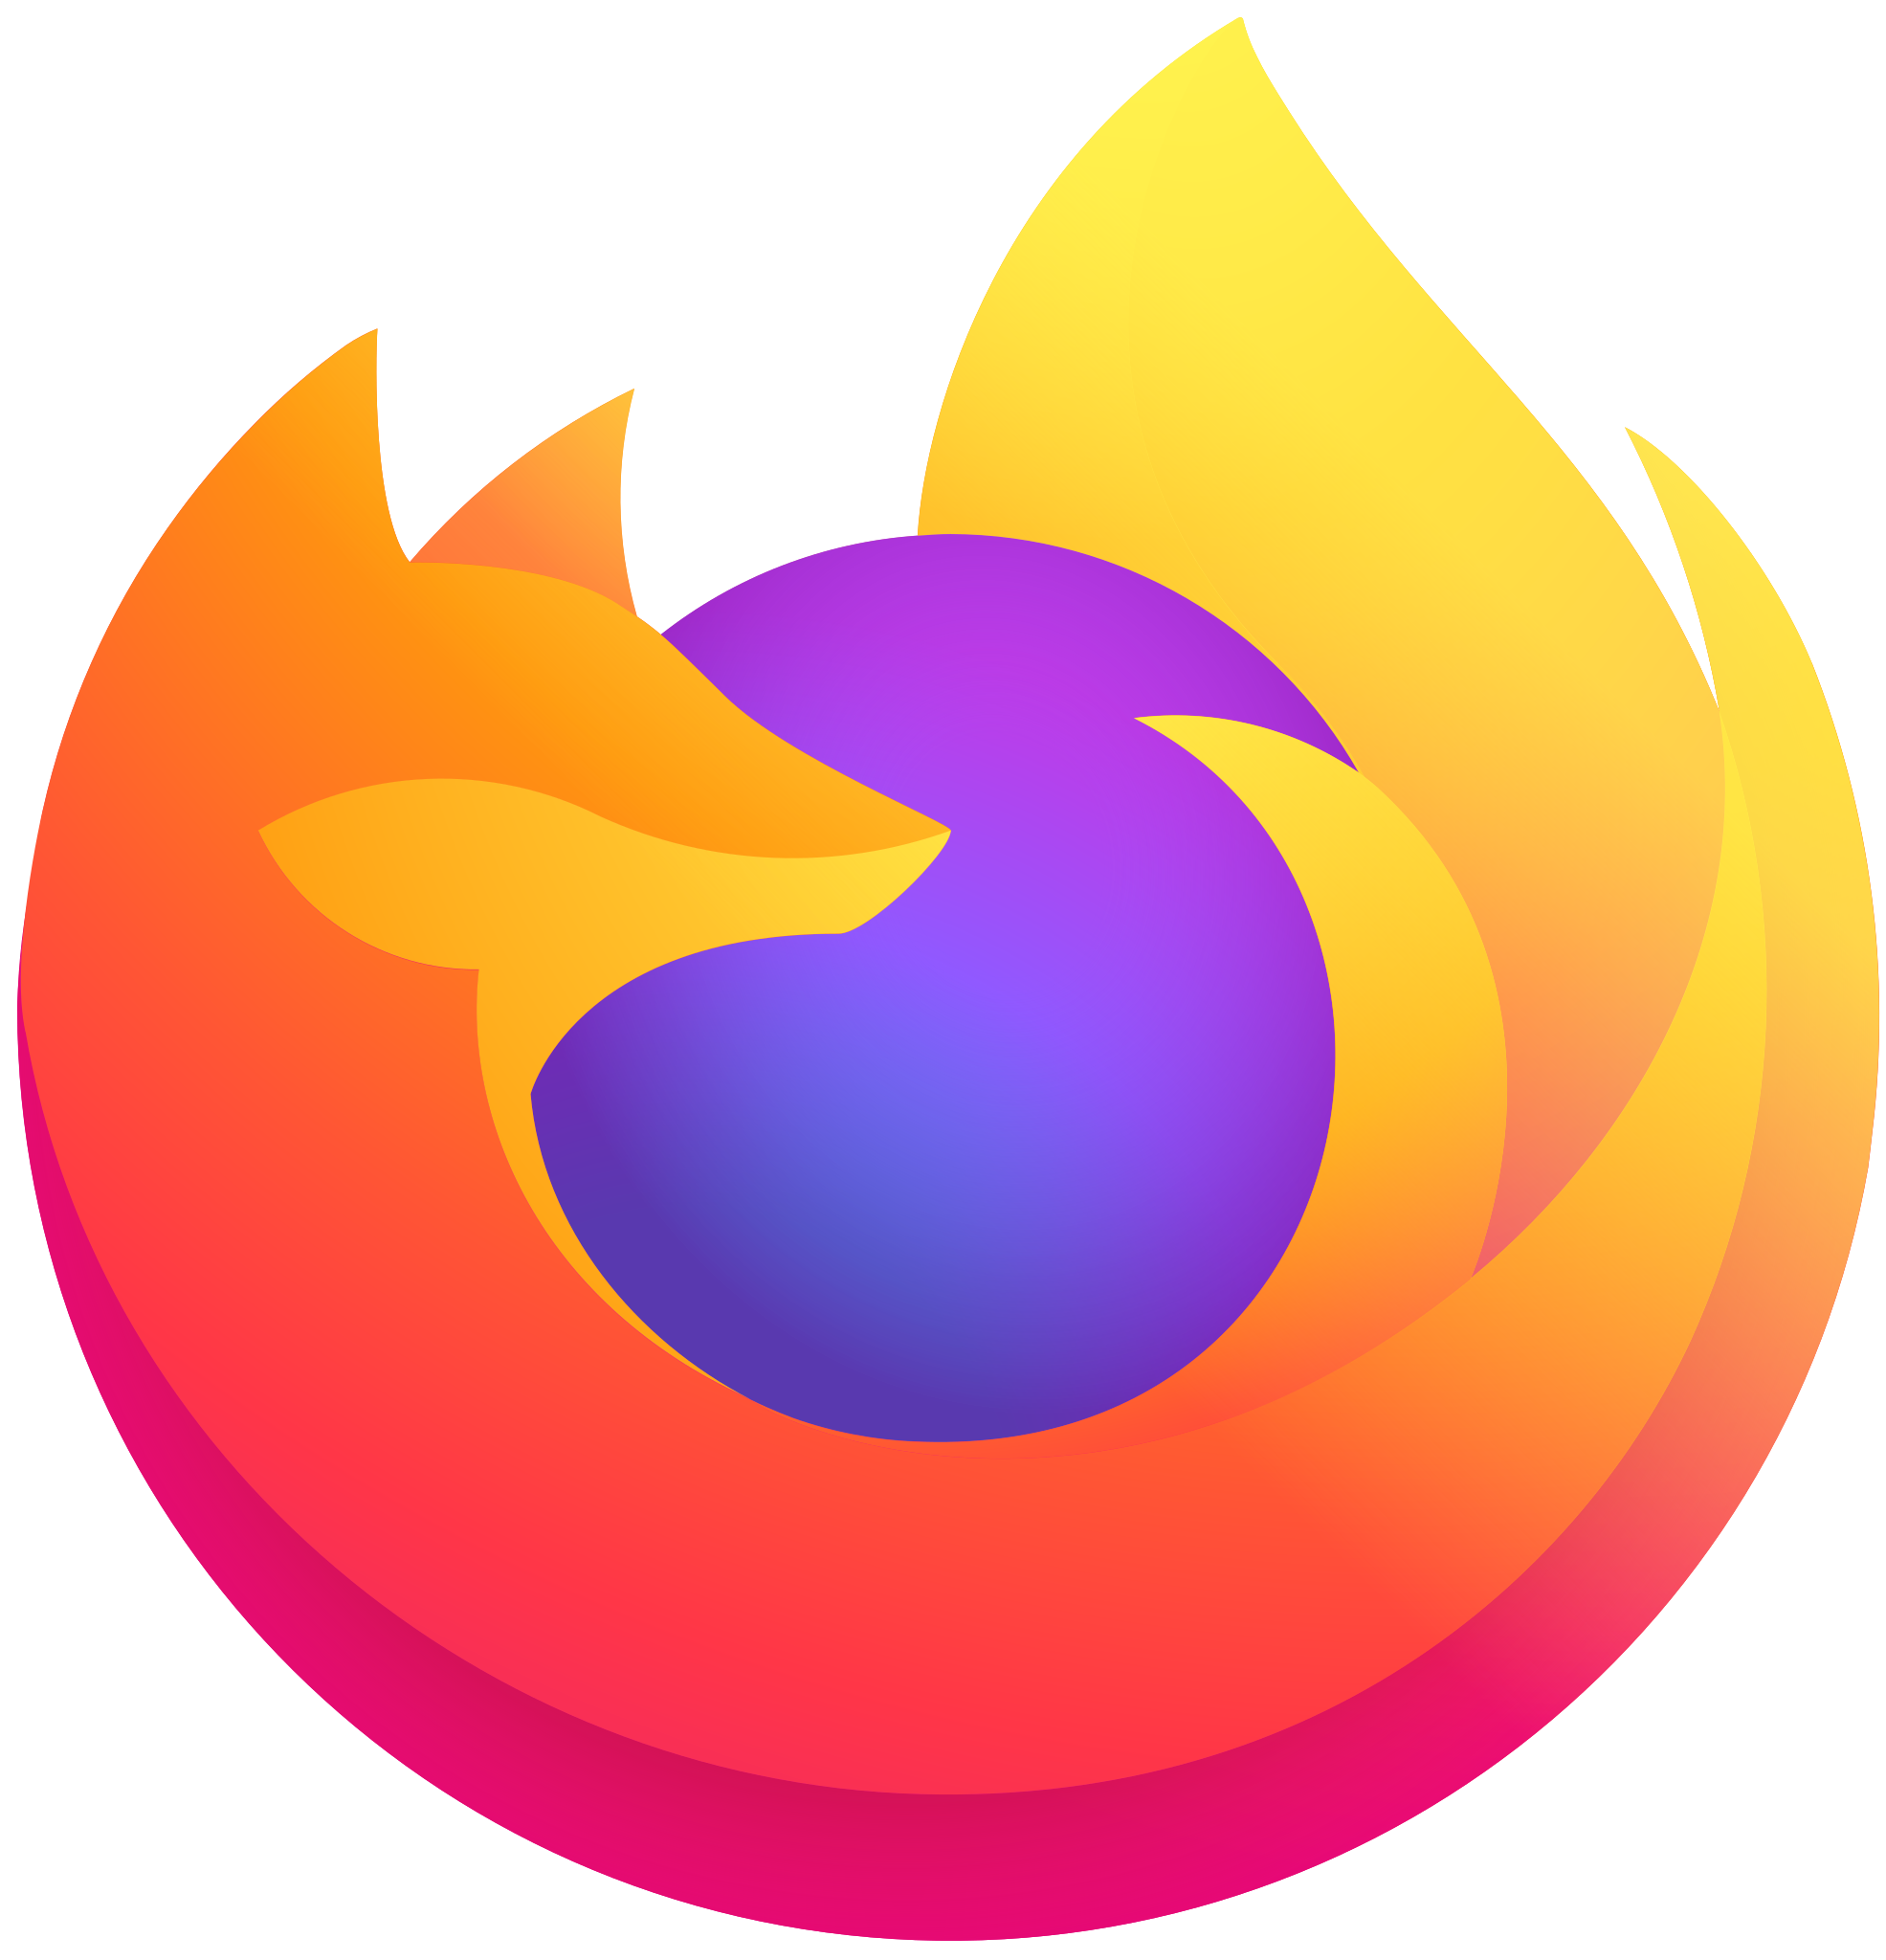 WebExtension API (for Firefox)